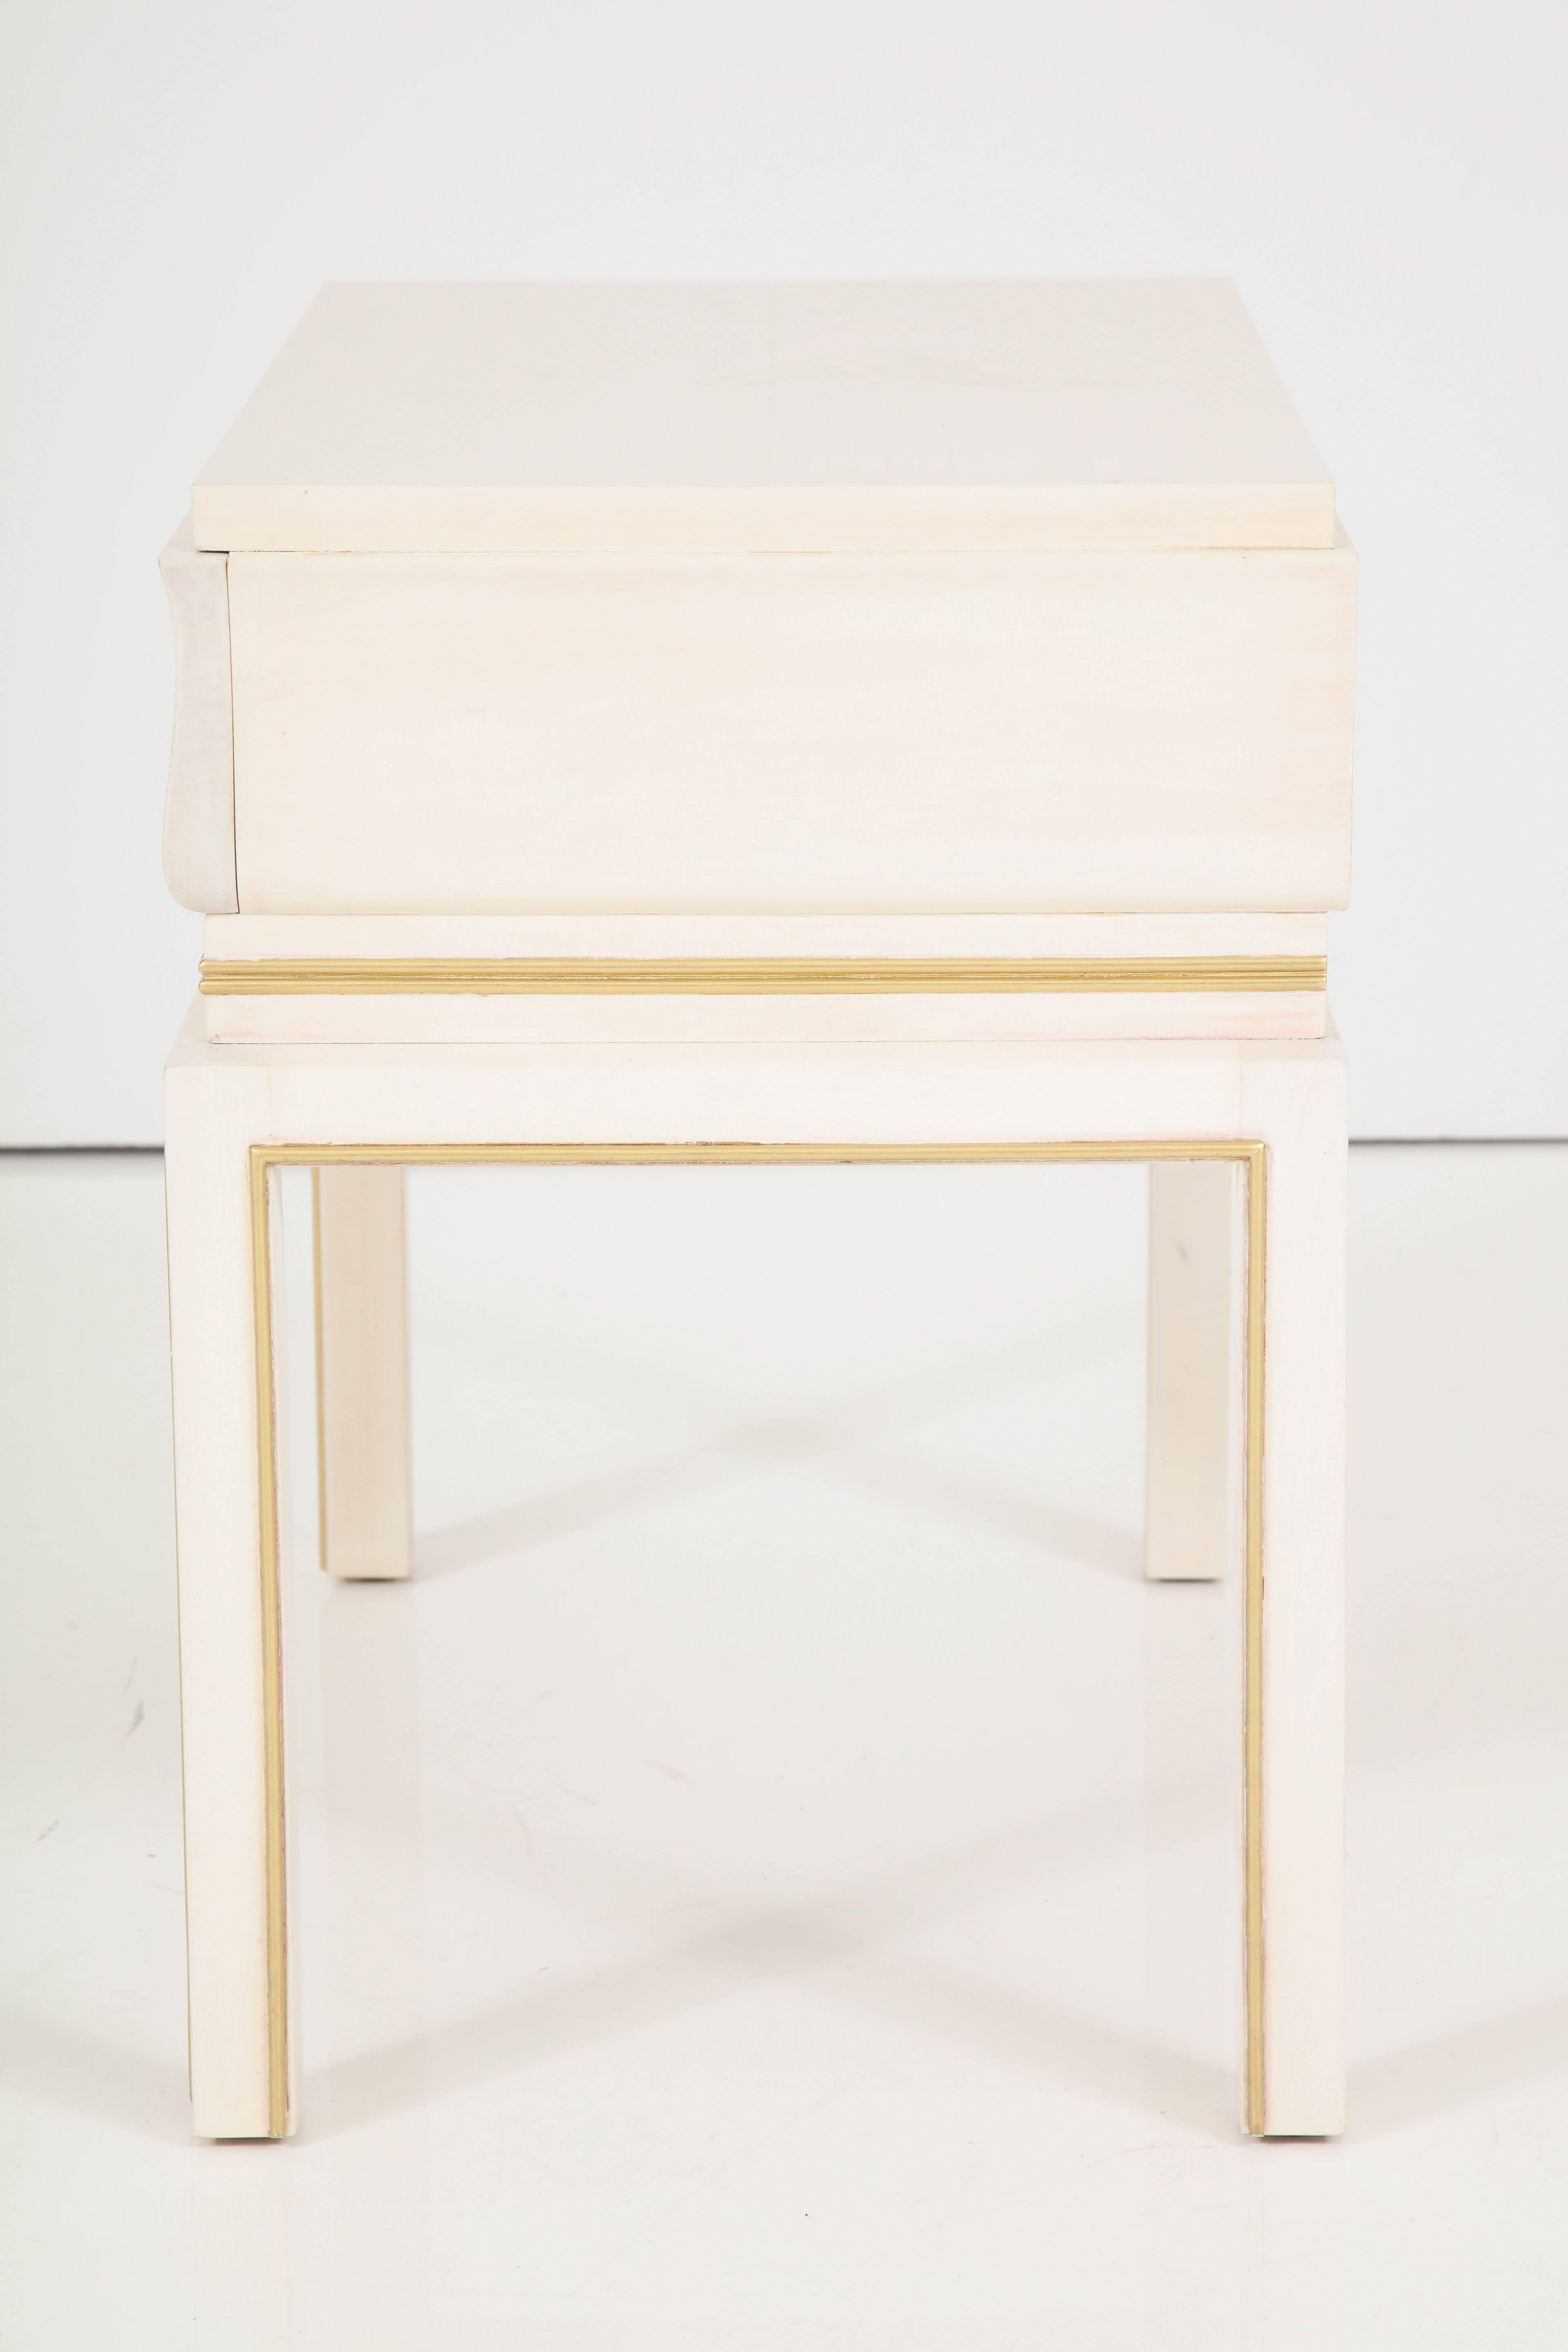 Tommi Parzinger Bleached Maple Nightstands In Excellent Condition For Sale In New York, NY